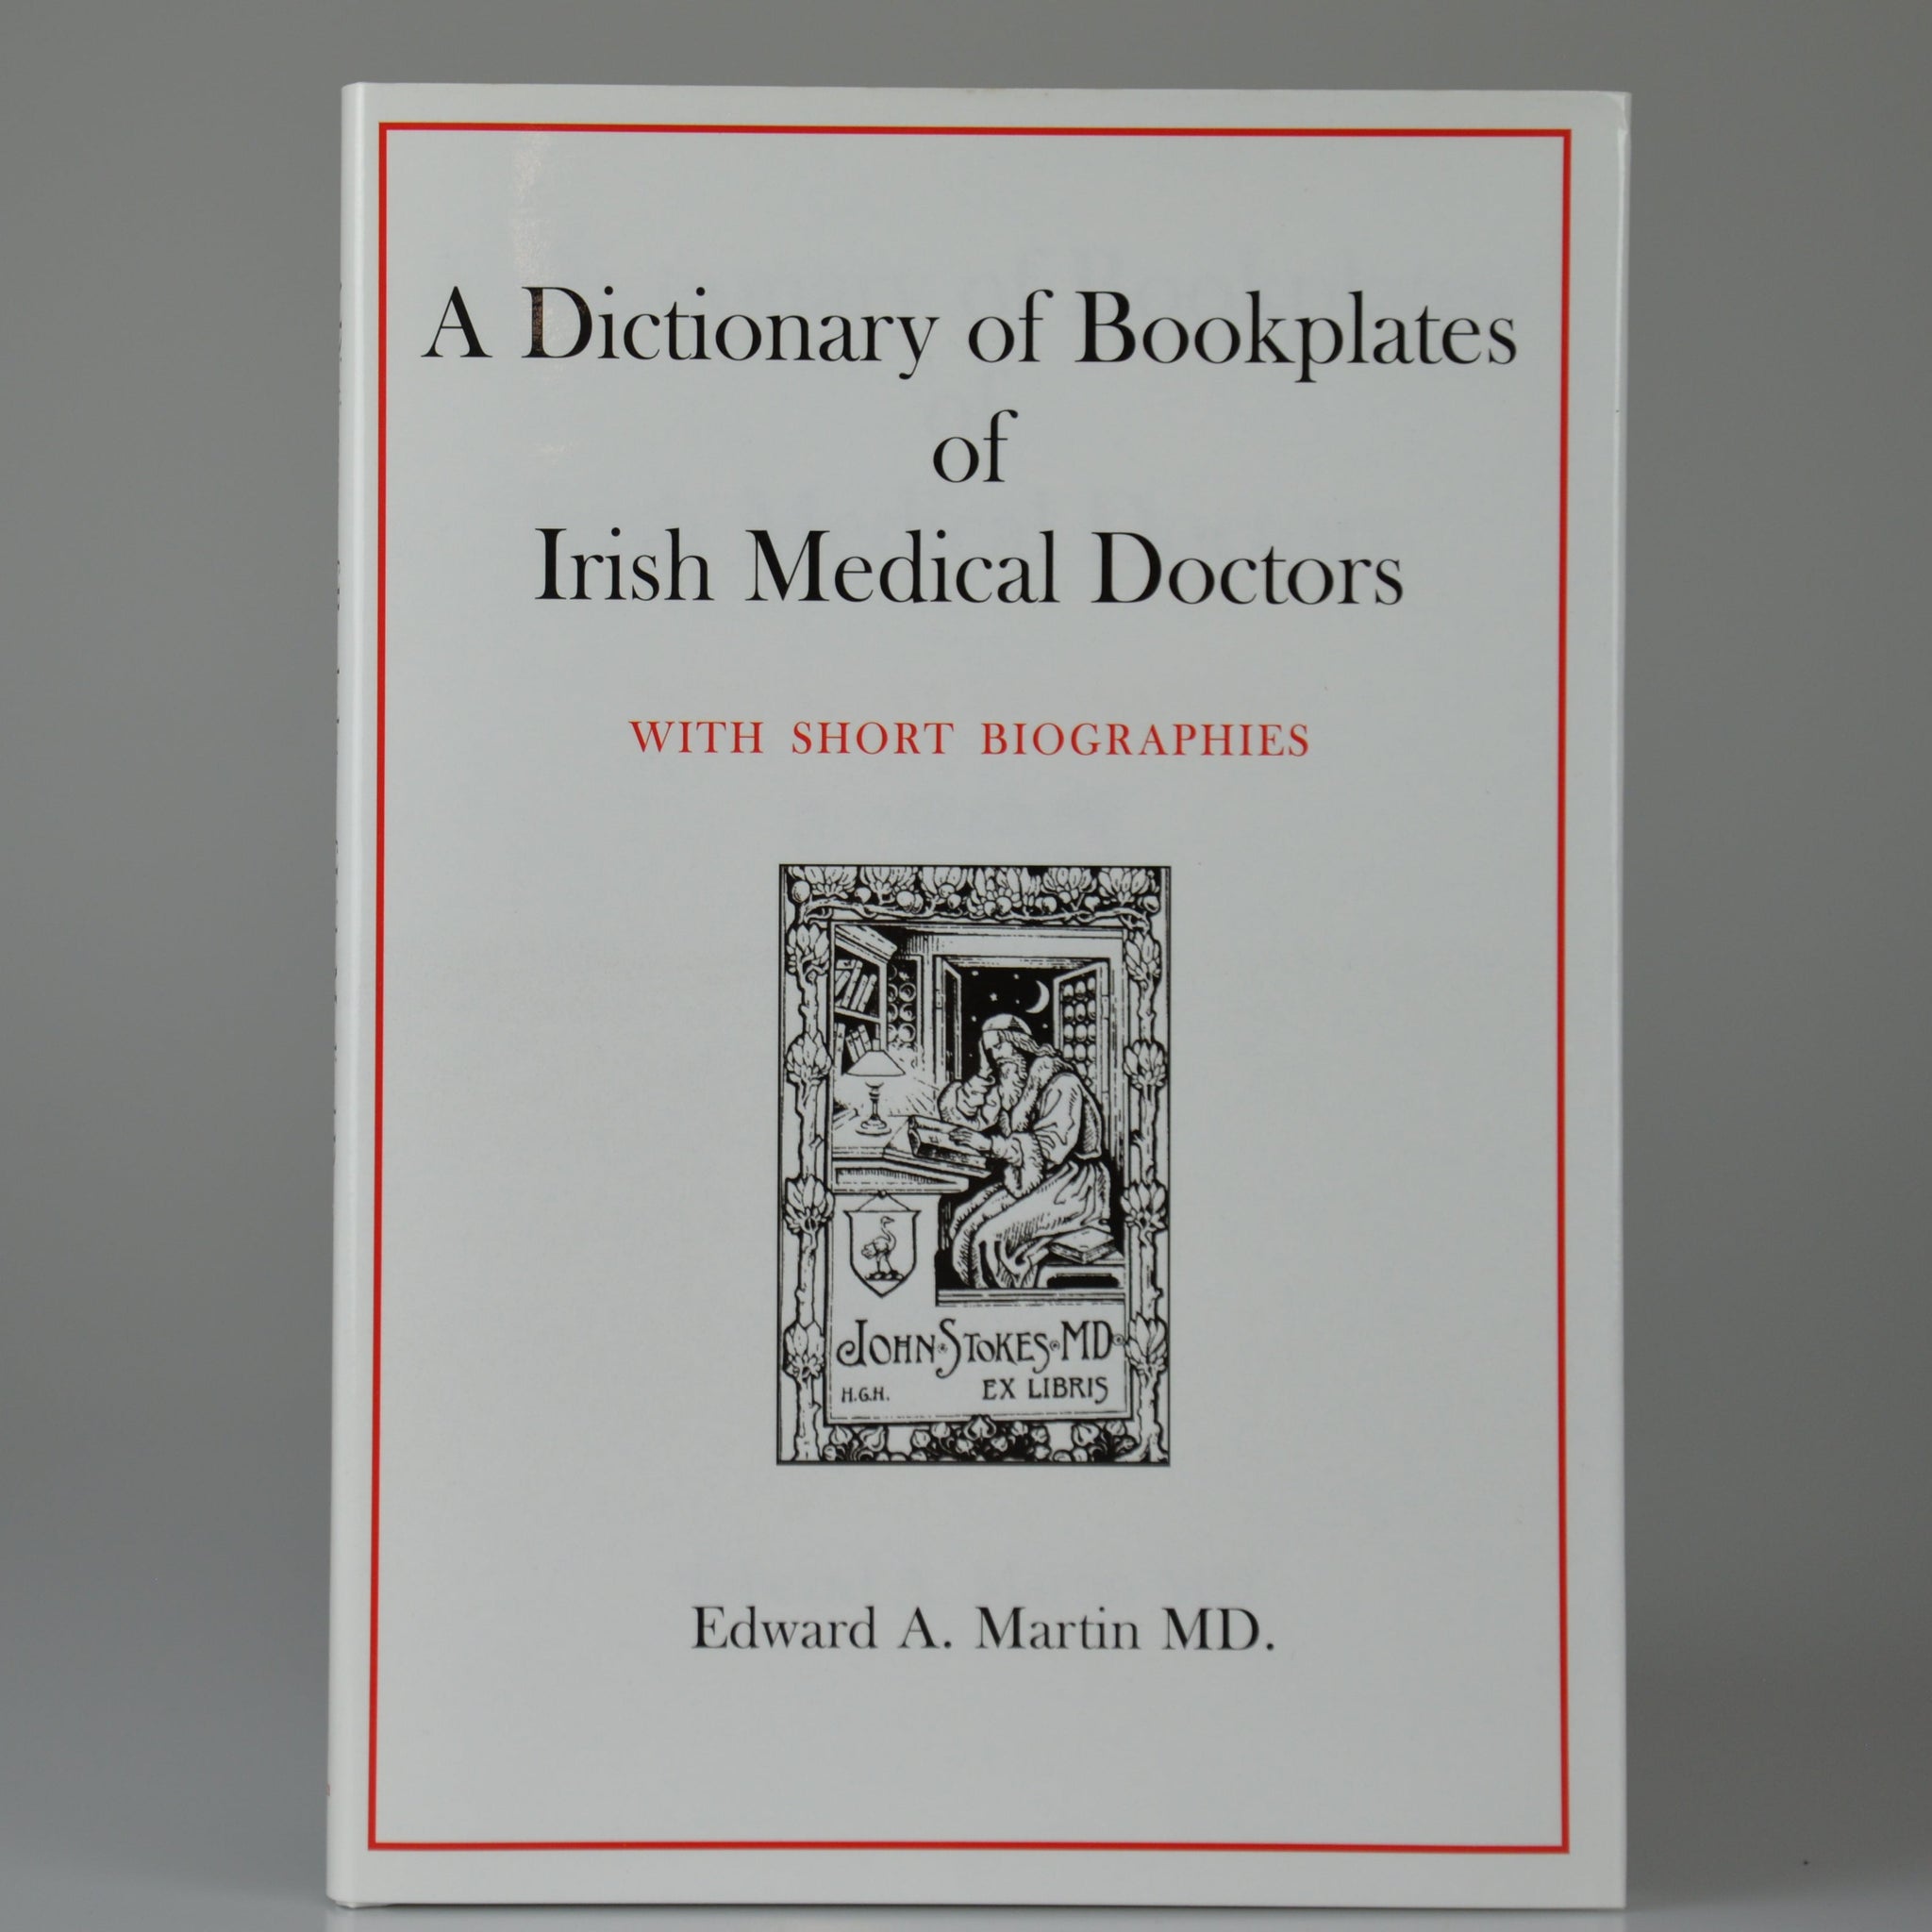 A dictionary of bookplates of Irish medical doctors by Edward Martin